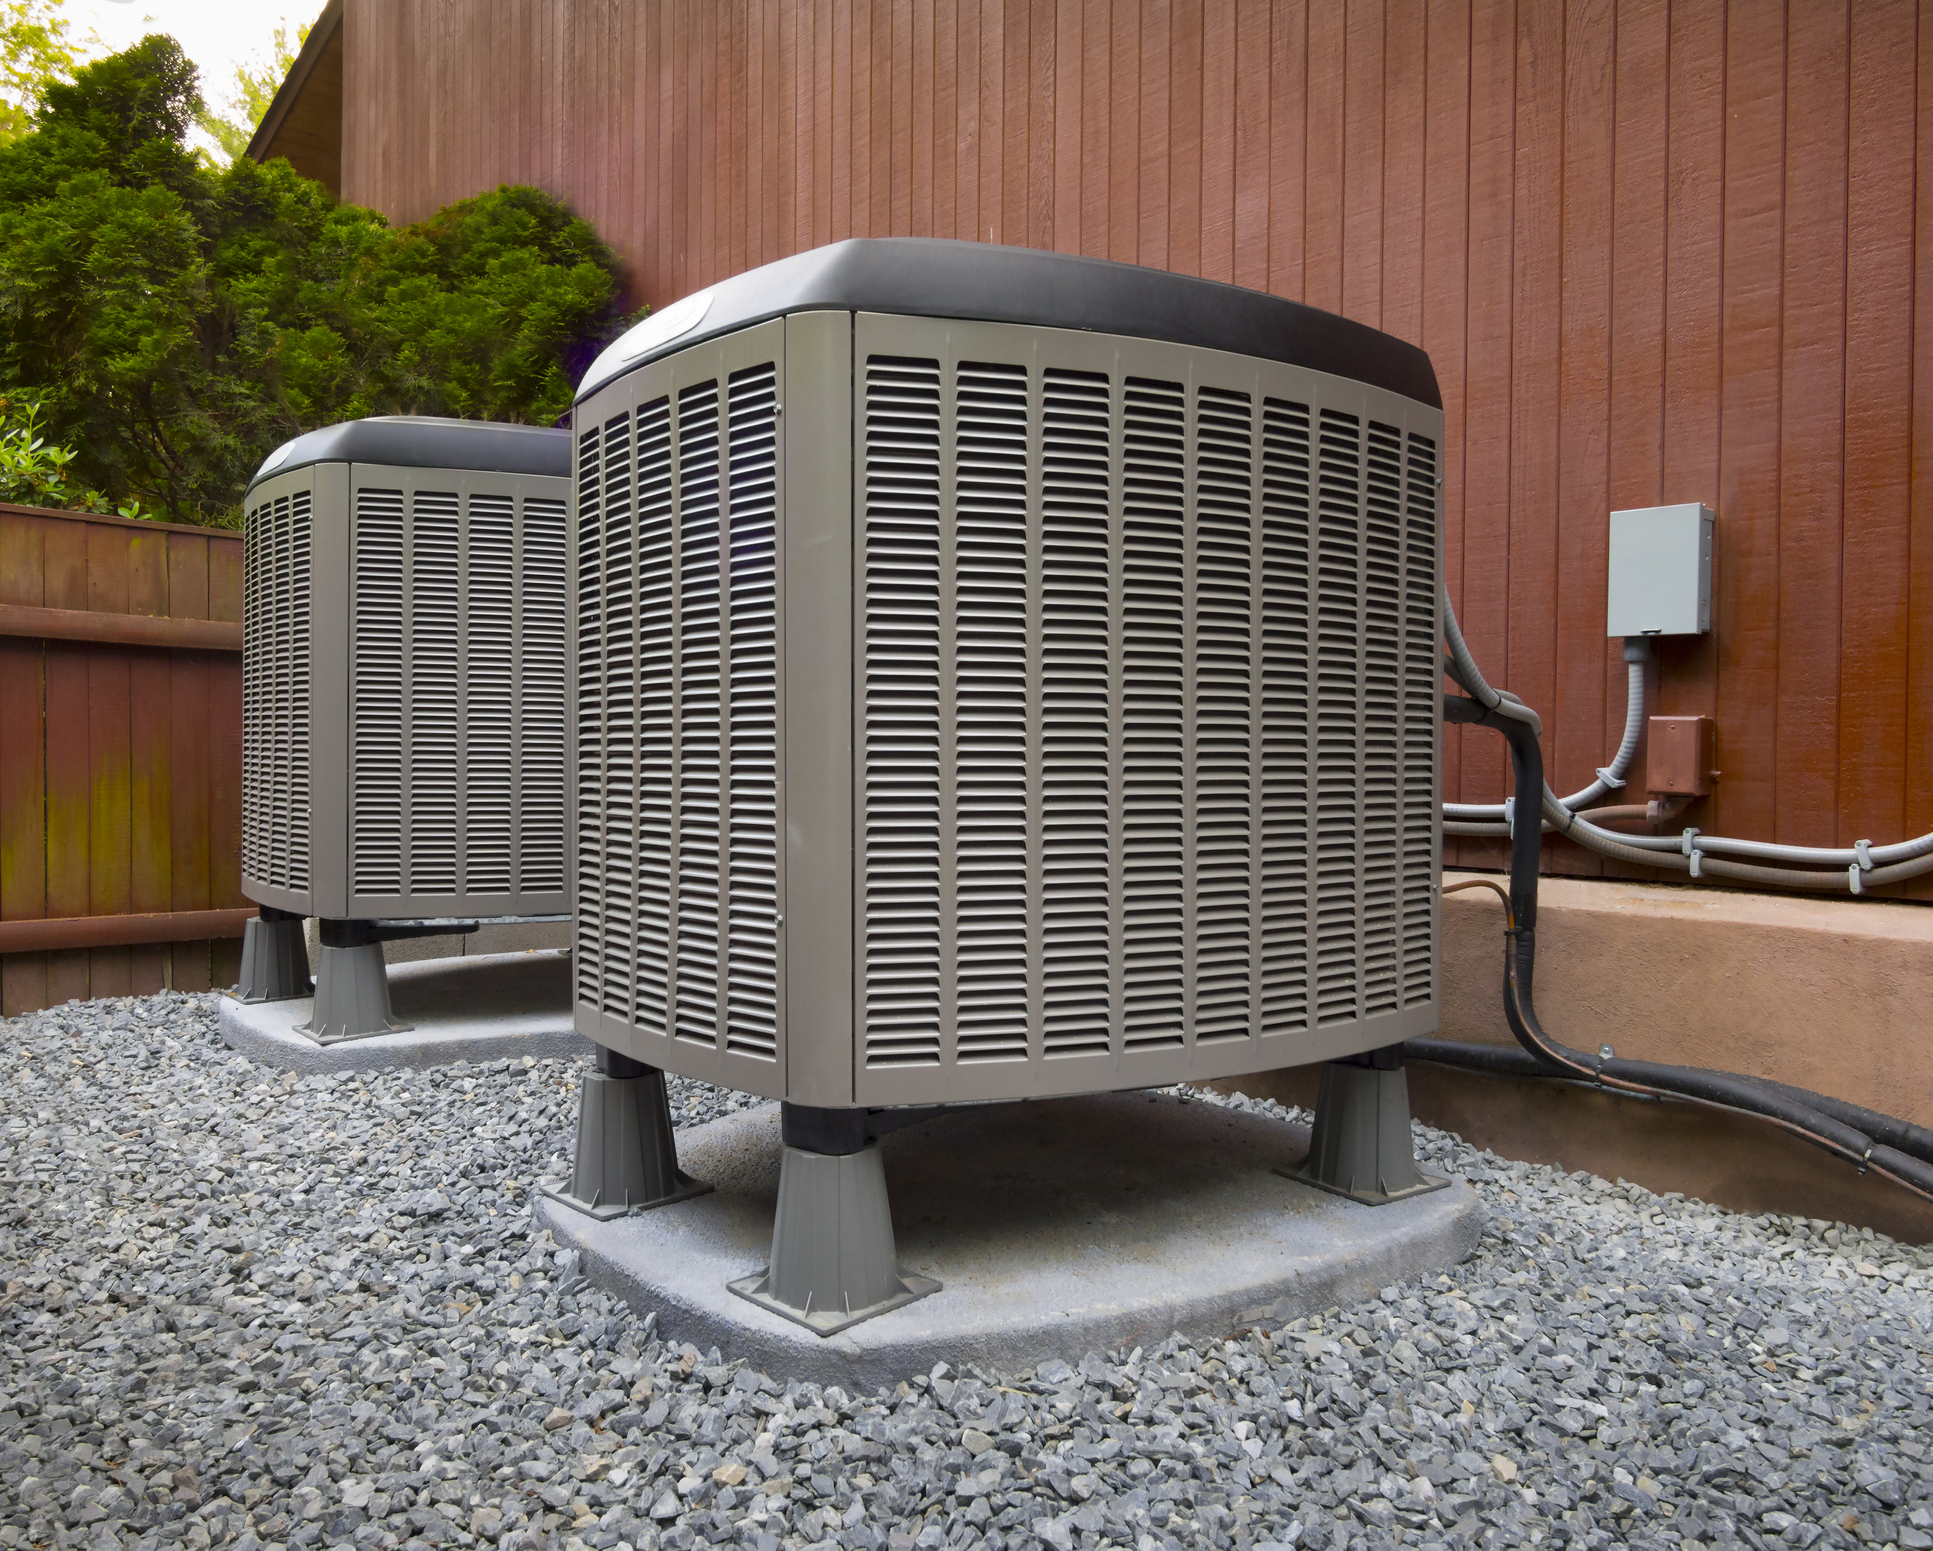 How to Help Your Heat Pump Run More Efficiently